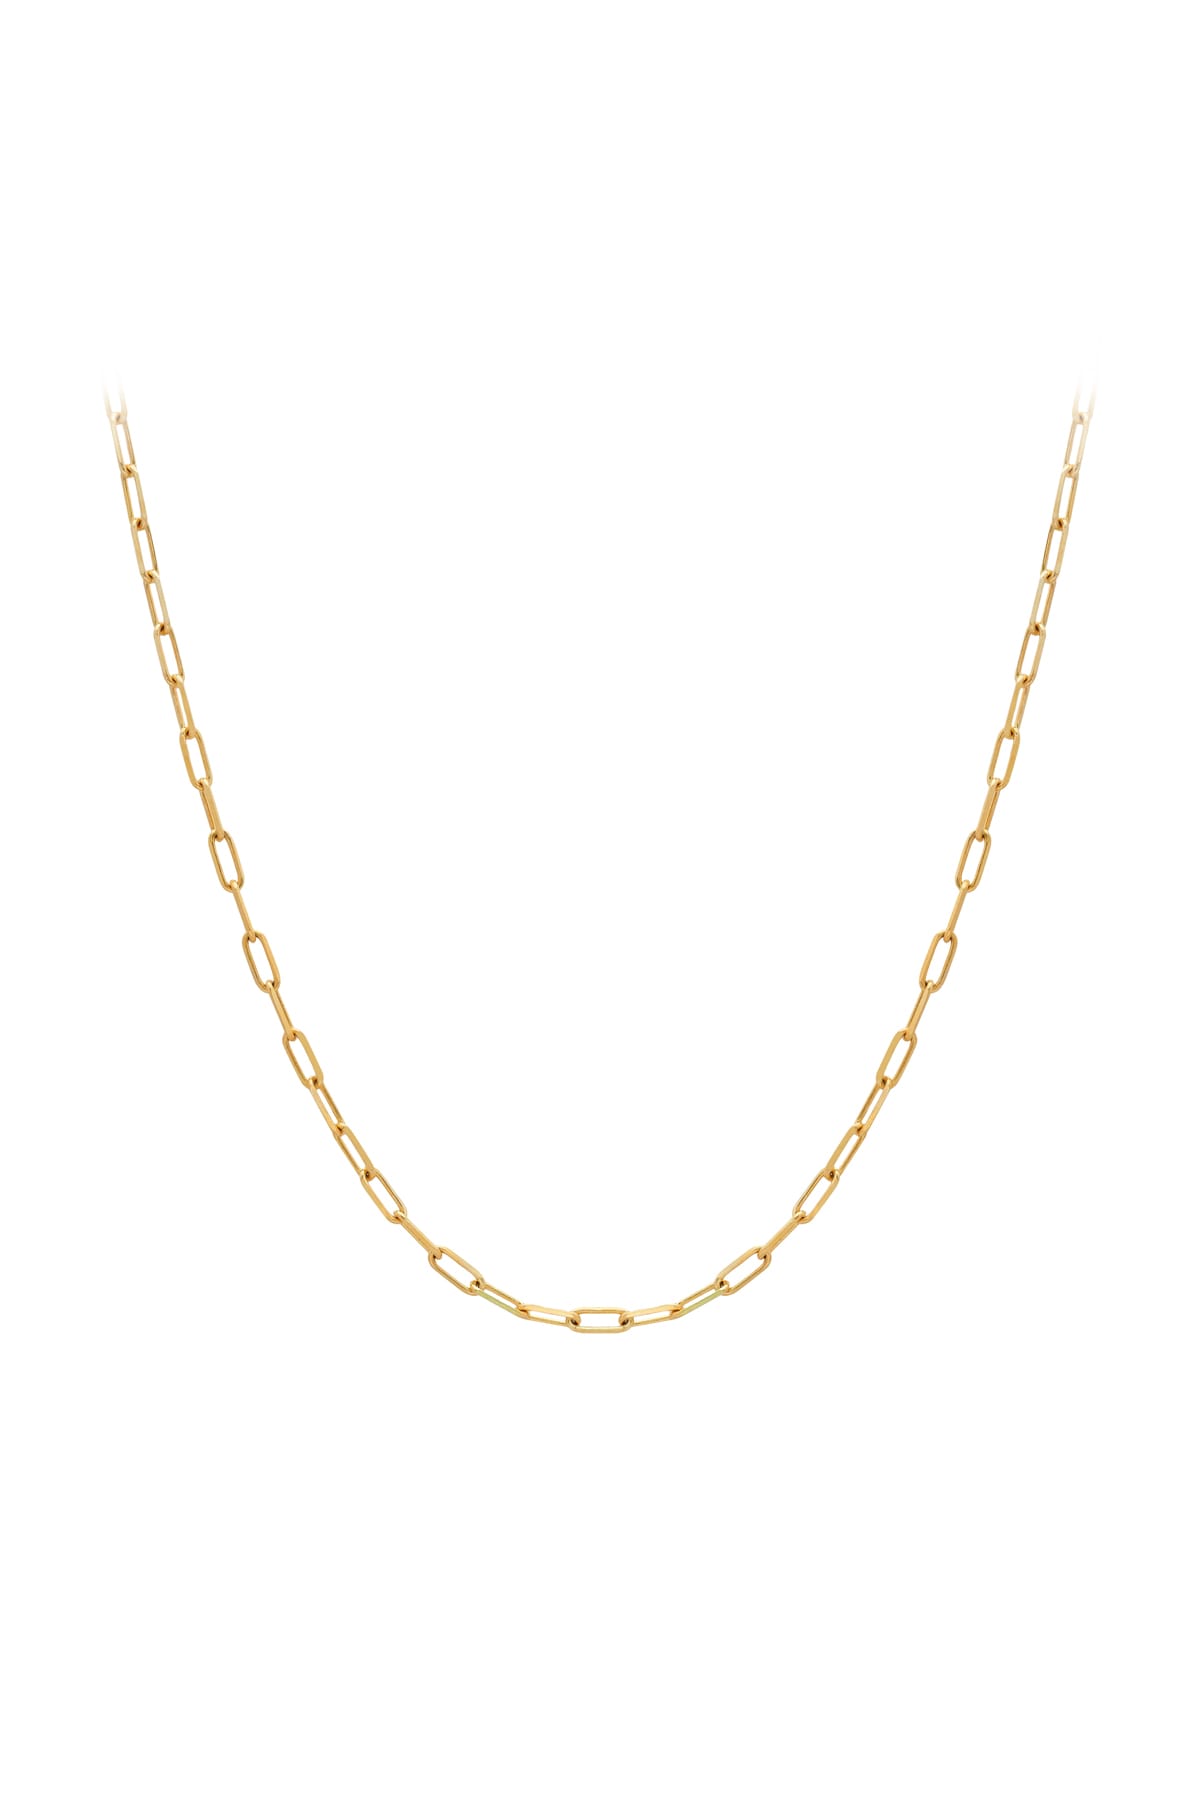 Long Open Oval Link 50cm Chain In Yellow Gold from LeGassick.